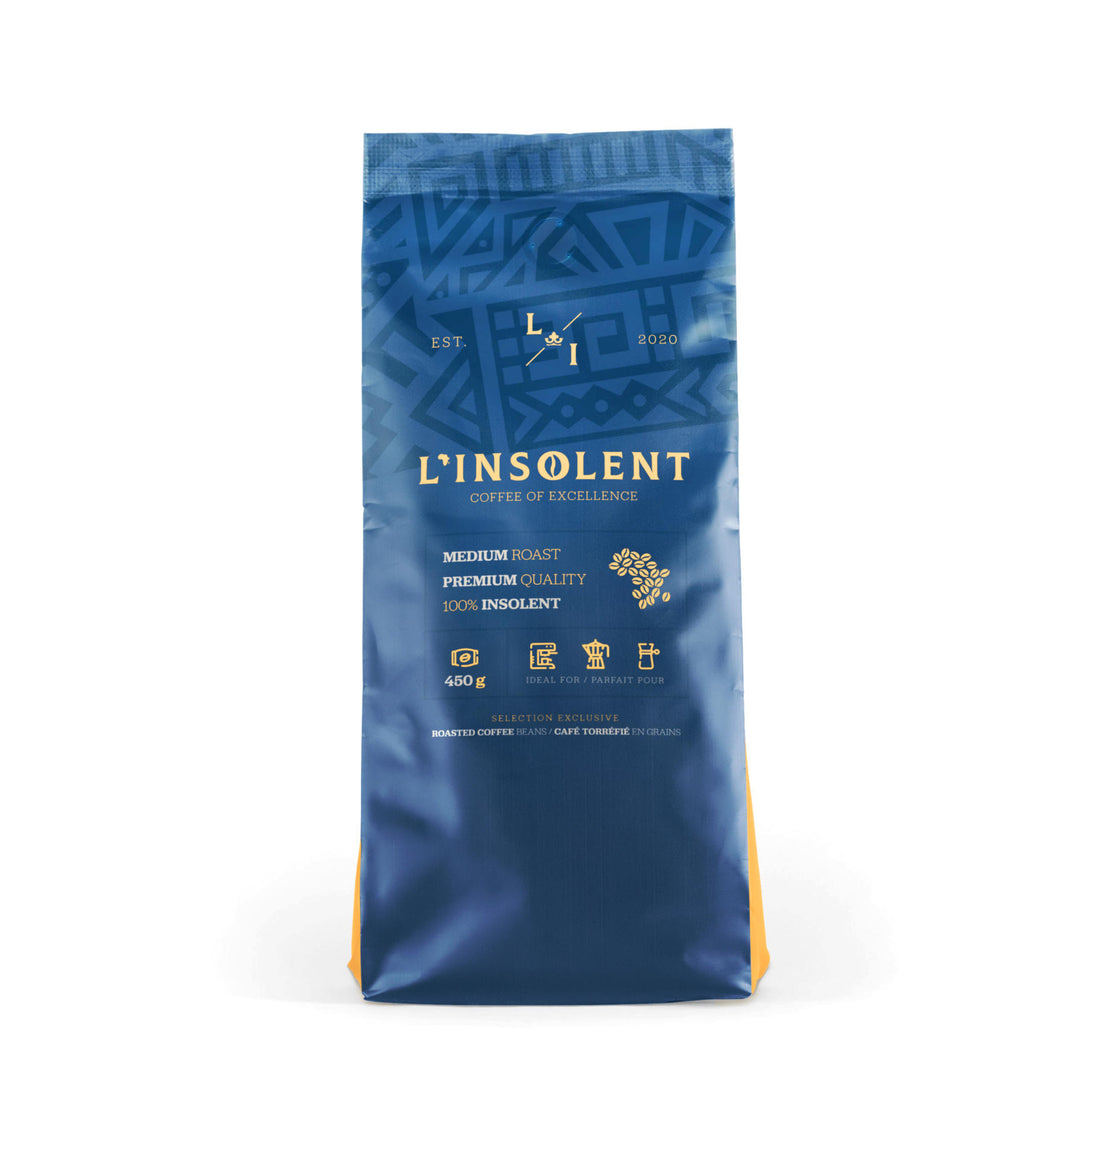 Roasted coffee beans 450g